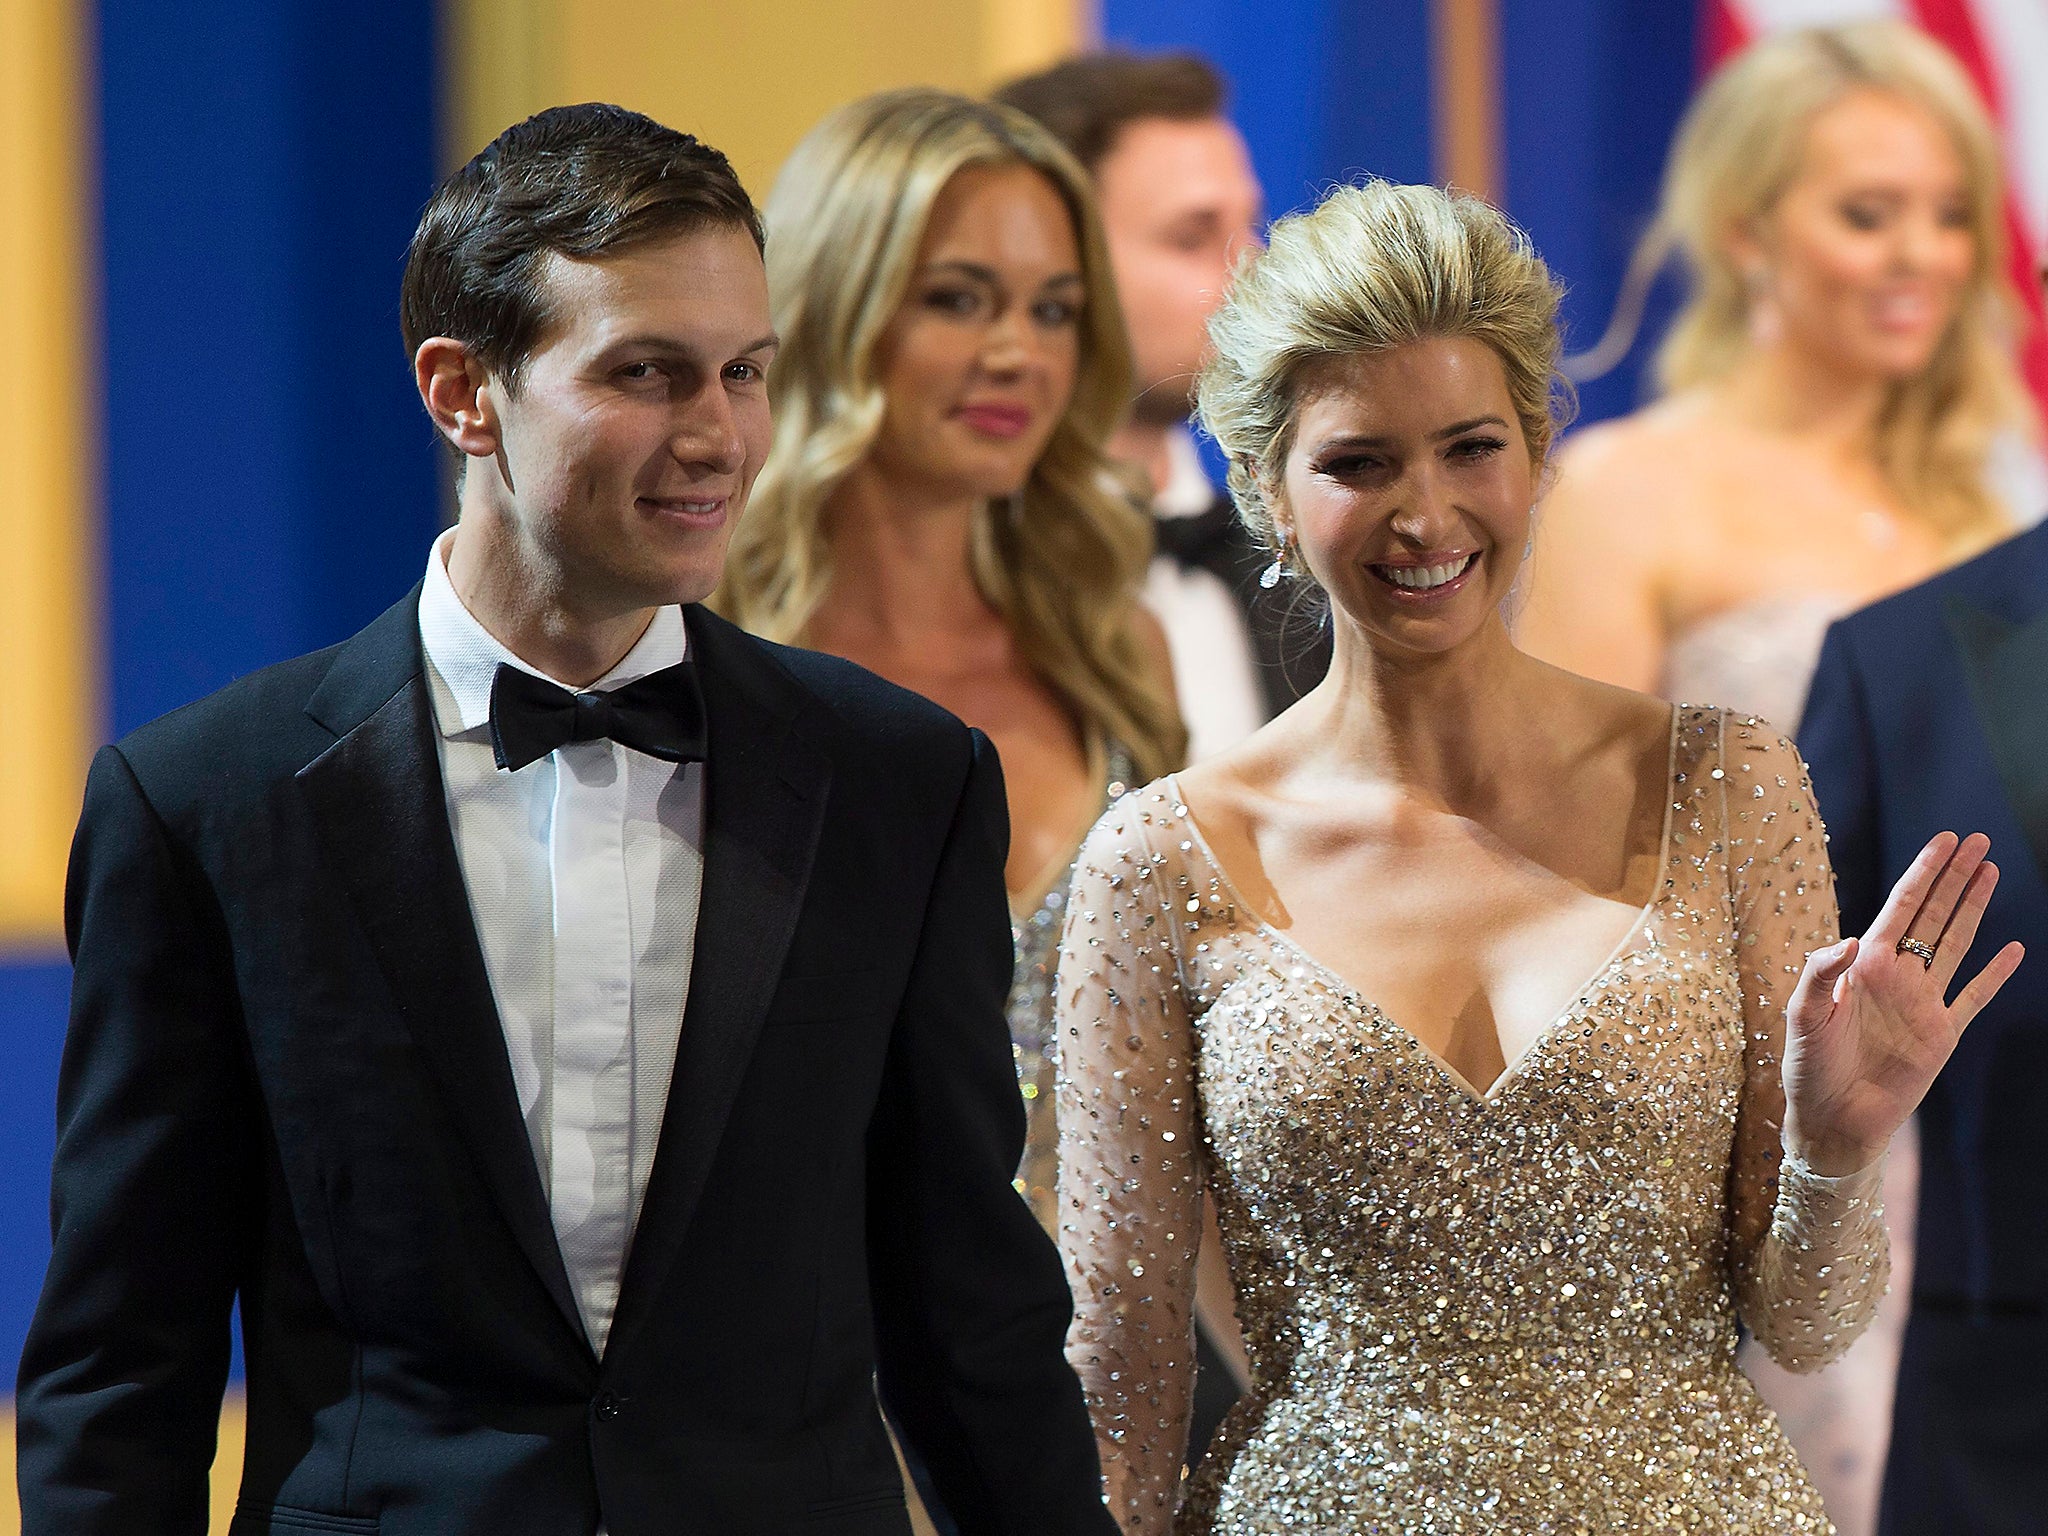 Ivanka Trump and Jared Kushner are known to have supported pro-LGBT rights causes in the past